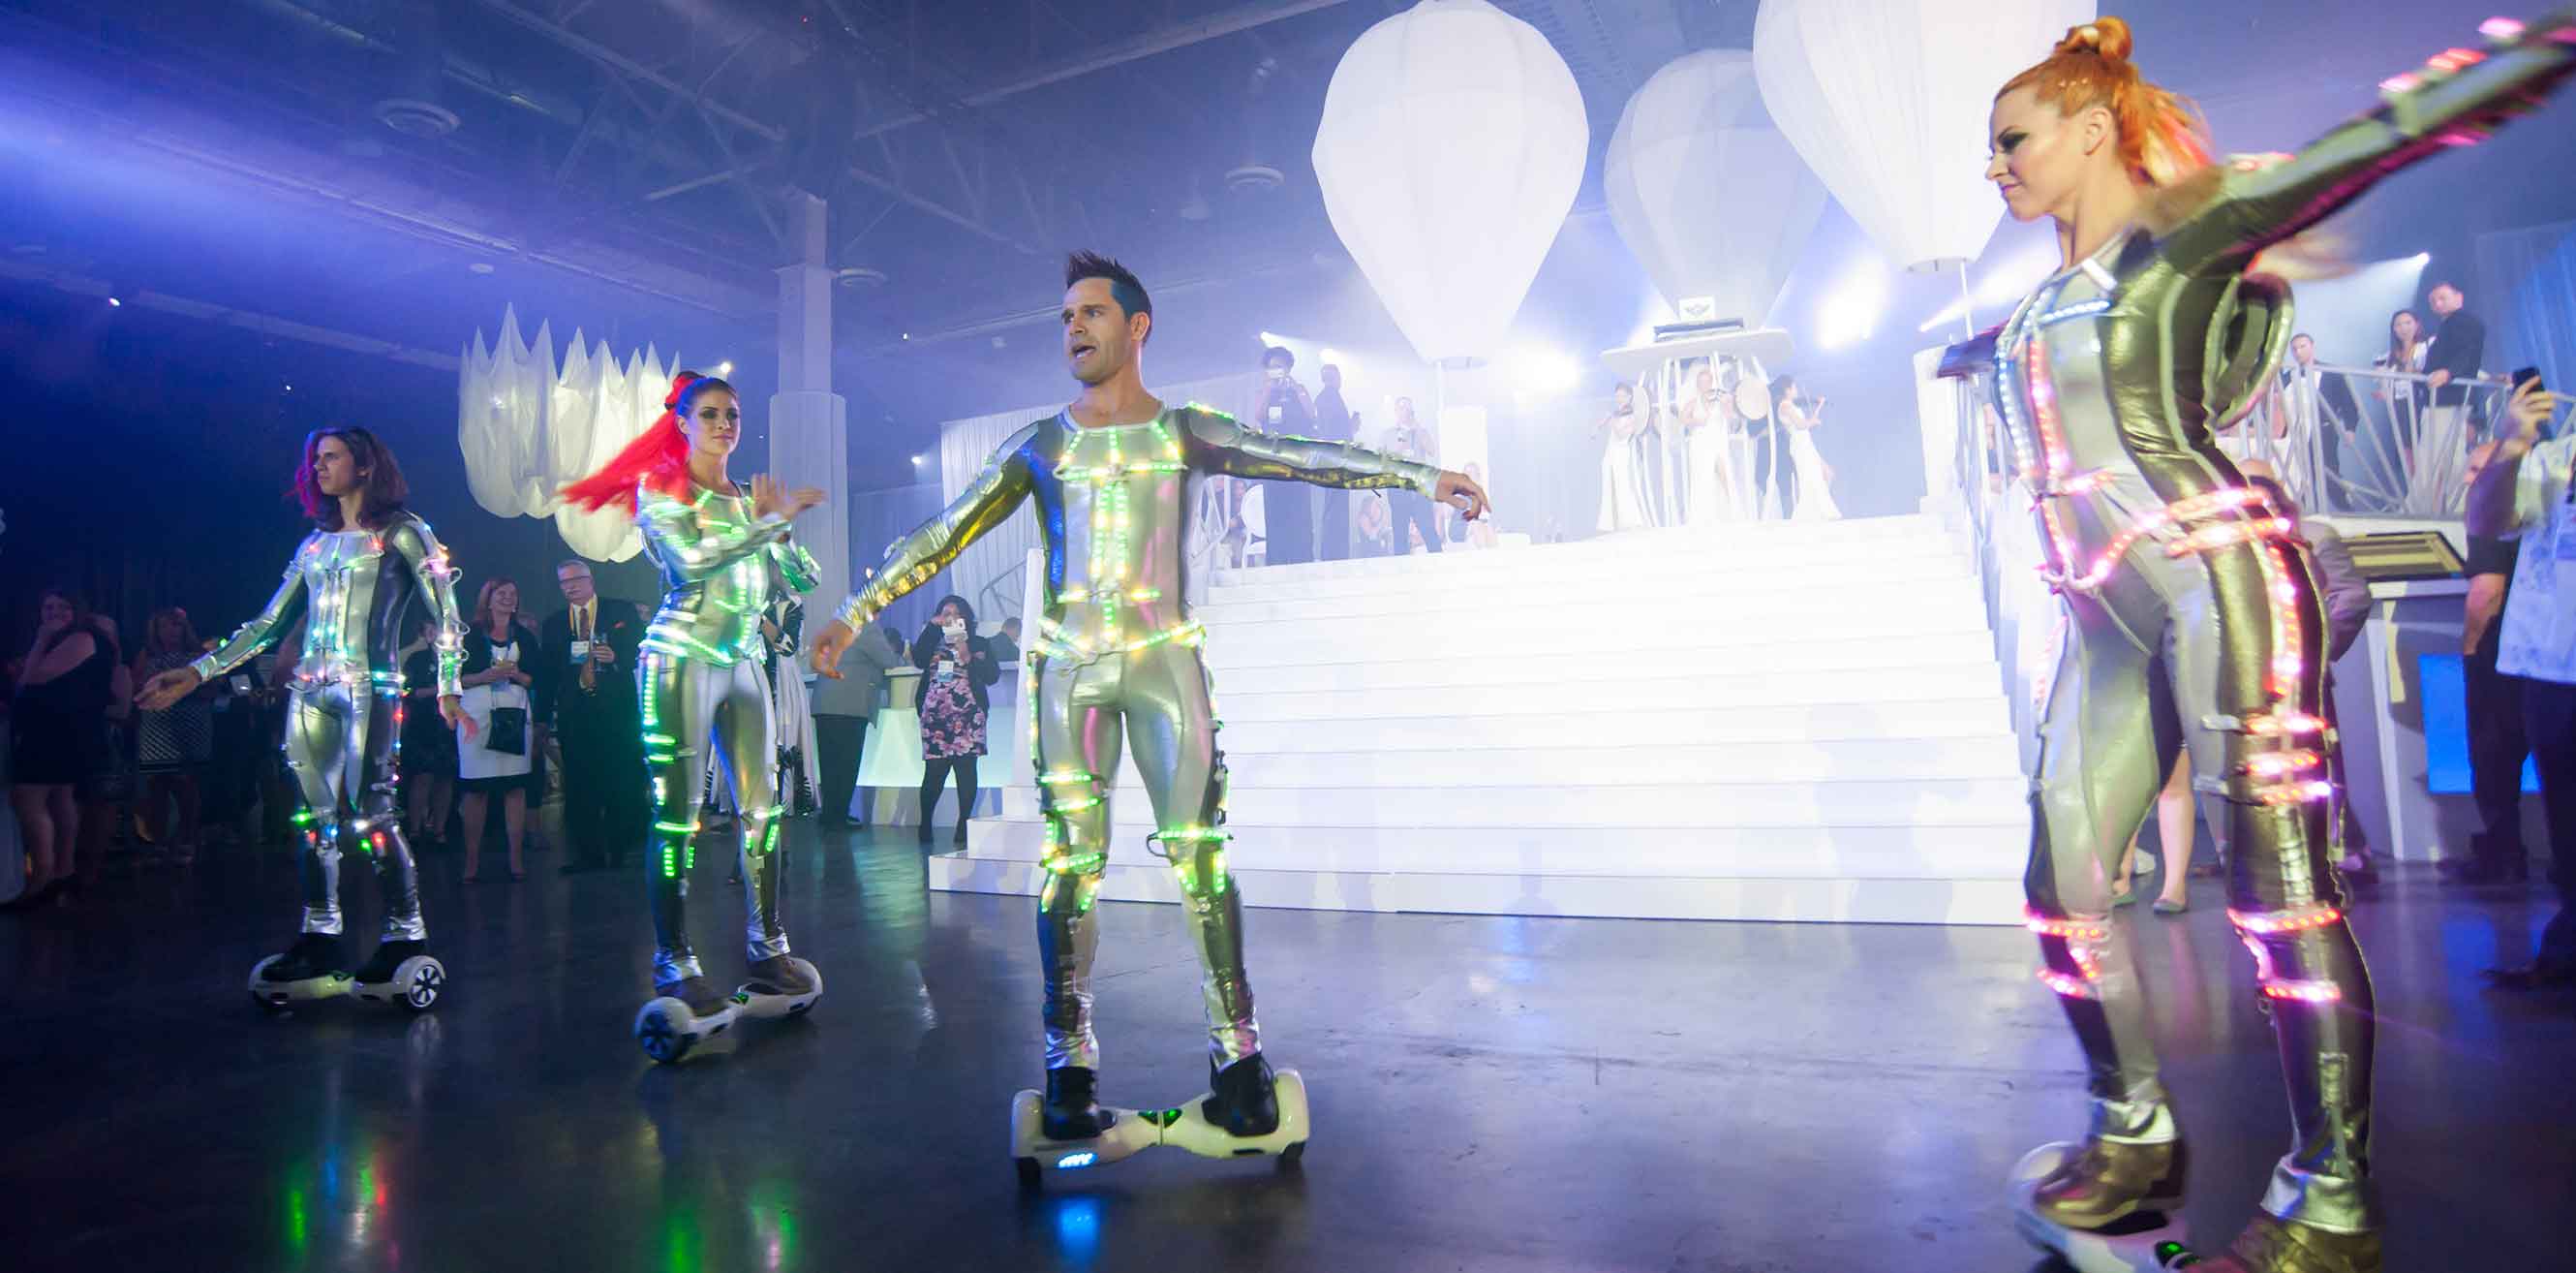 Performers in neon suits glide around the event on scooters